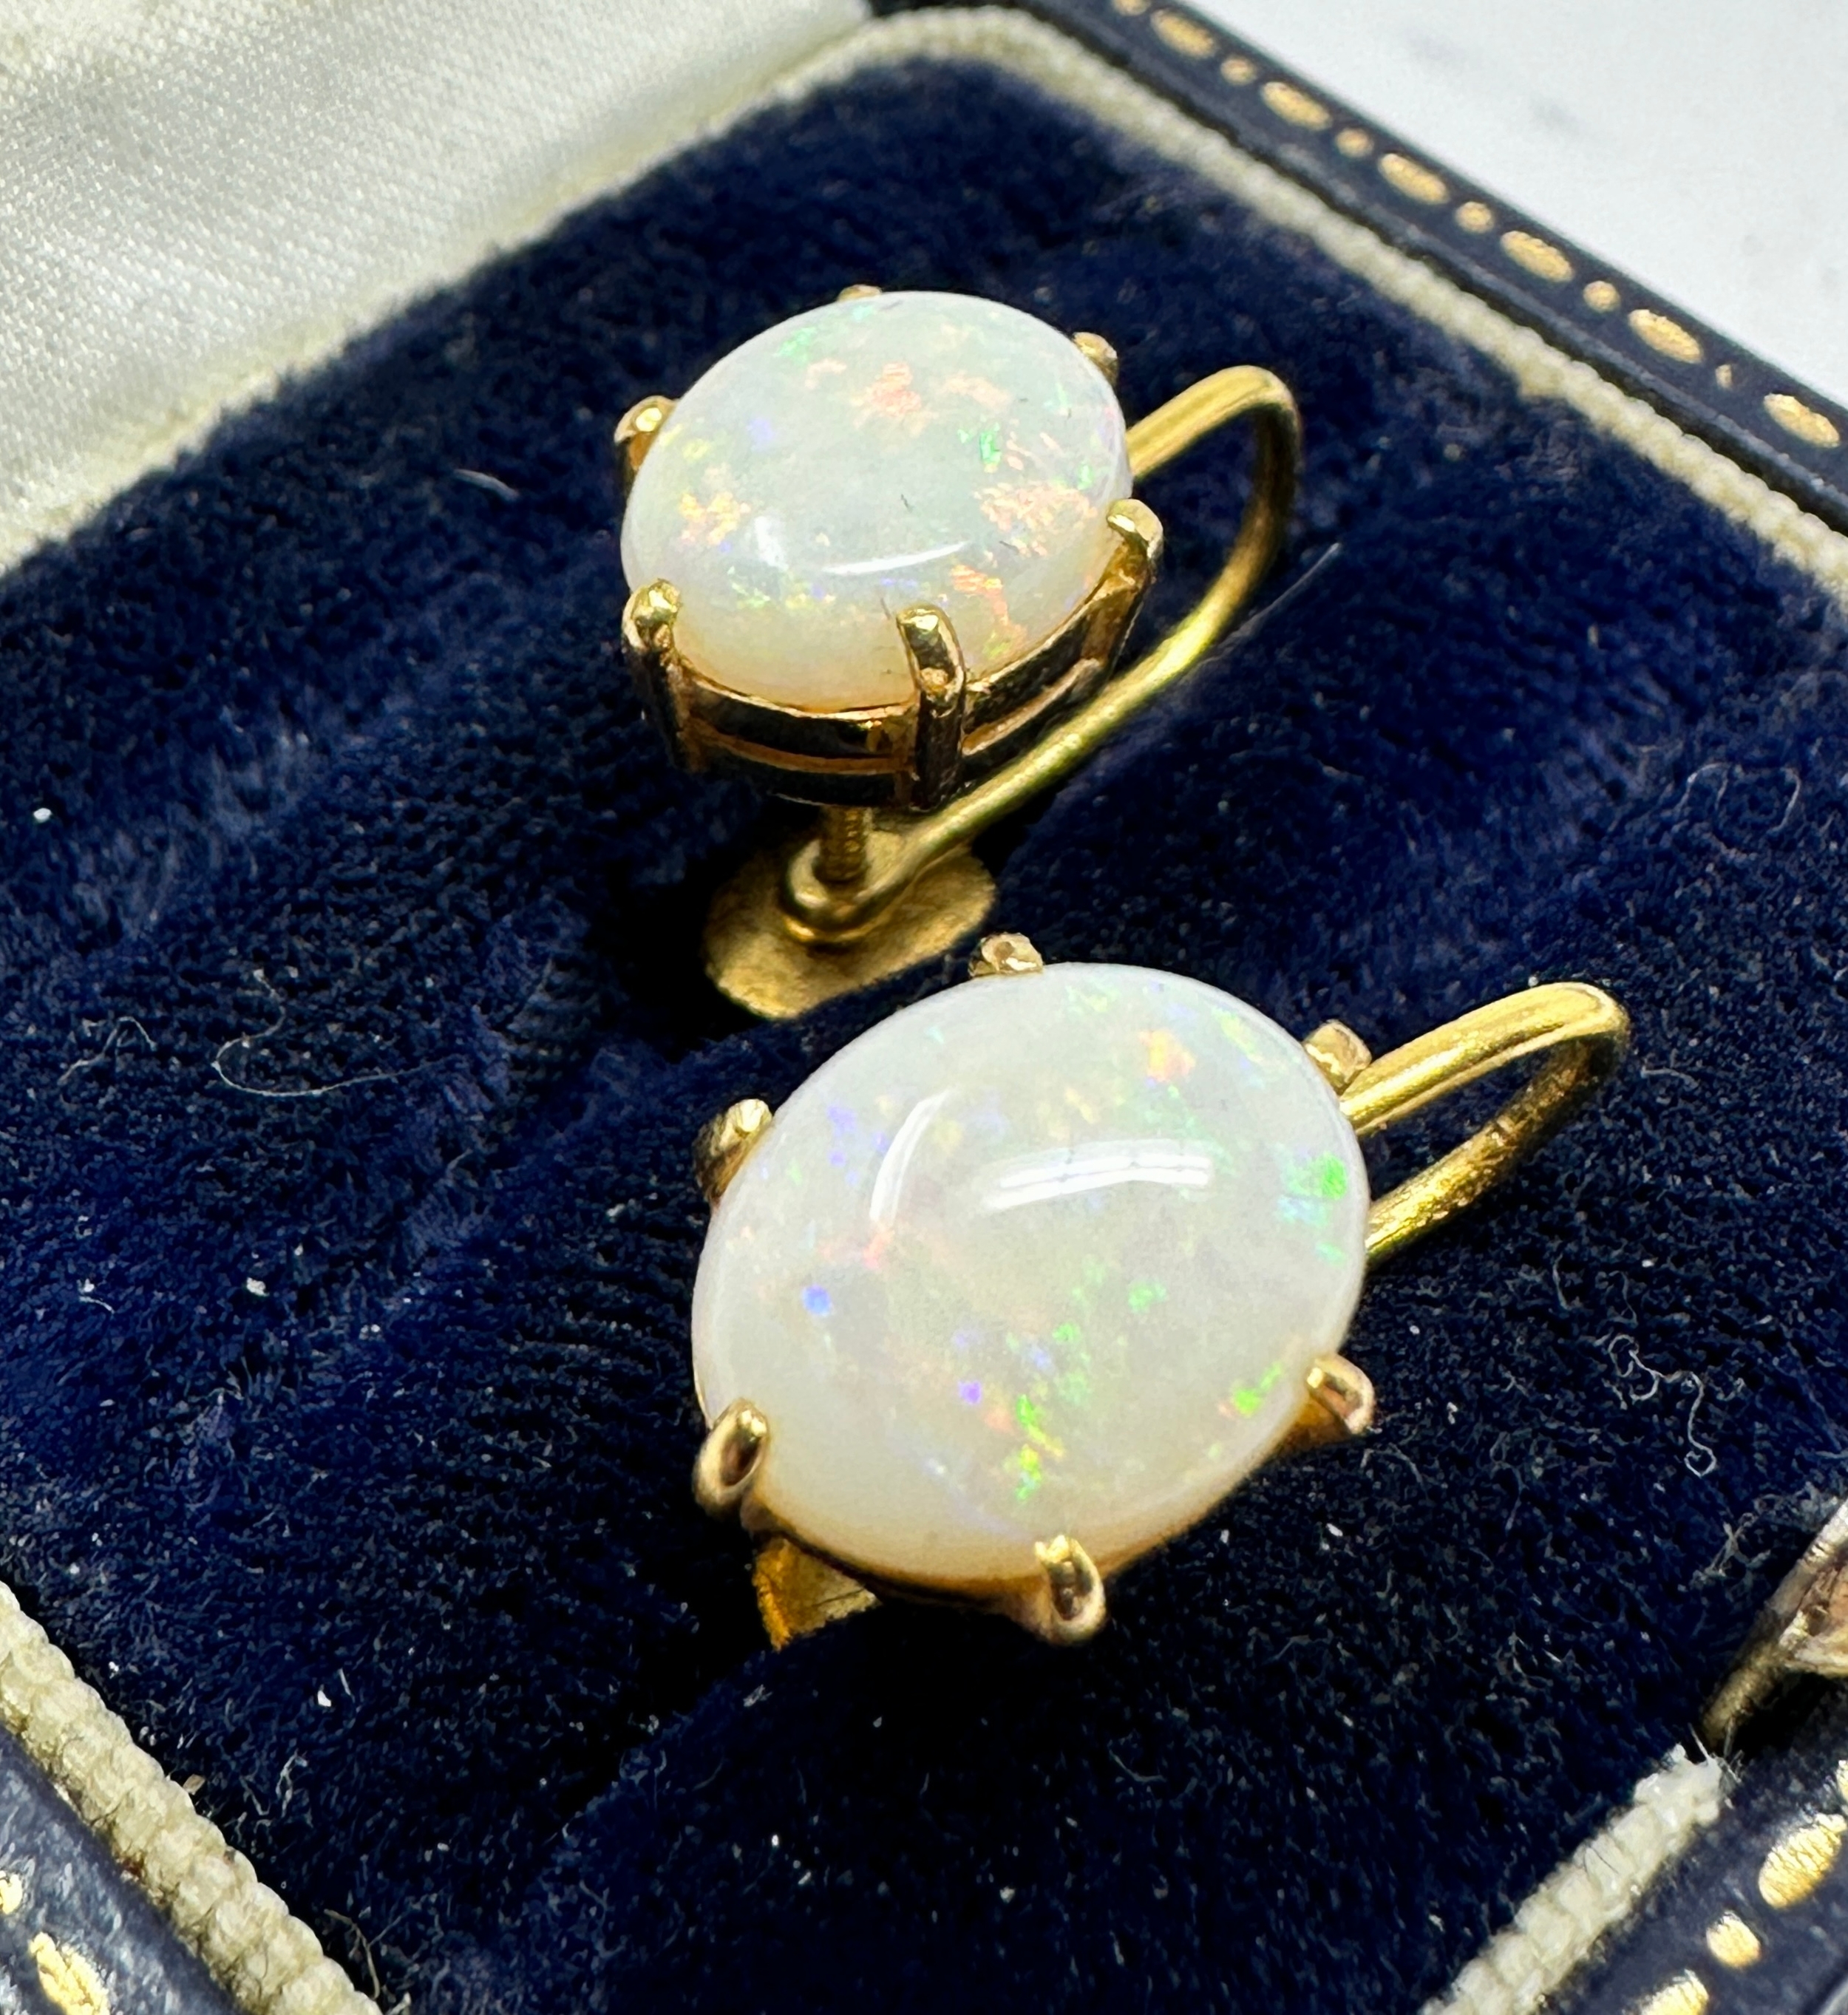 18ct gold opal earrings eack opal measures approx 10mm by 8mm weight 4g xrt tested as 18ct gold - Image 2 of 3